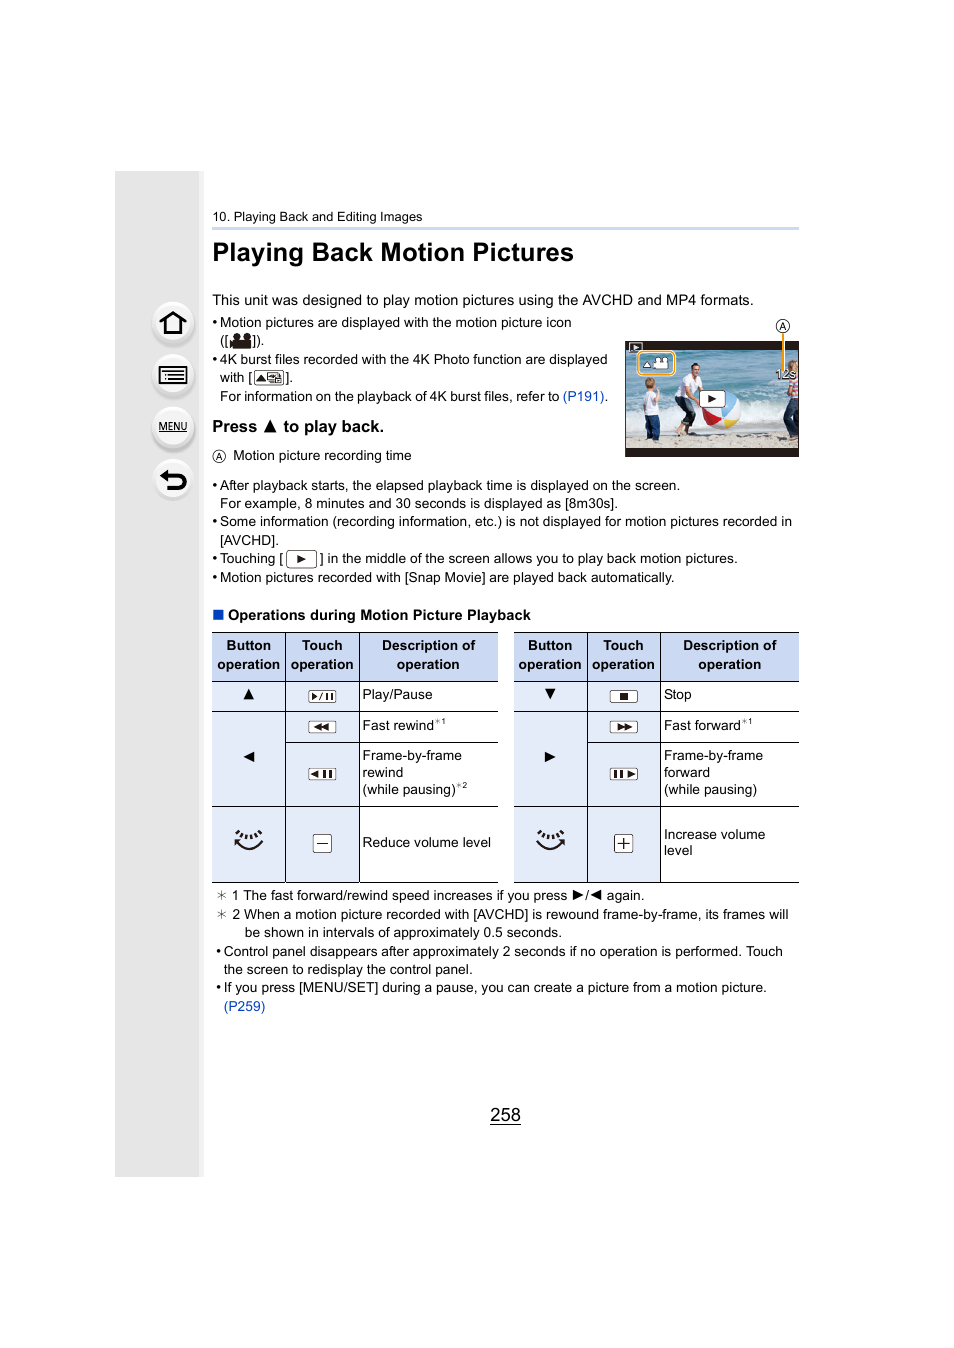 Playing back motion pictures, P258, Press 3 to play back | Panasonic Lumix DMC-G7 body User Manual | Page 258 / 411